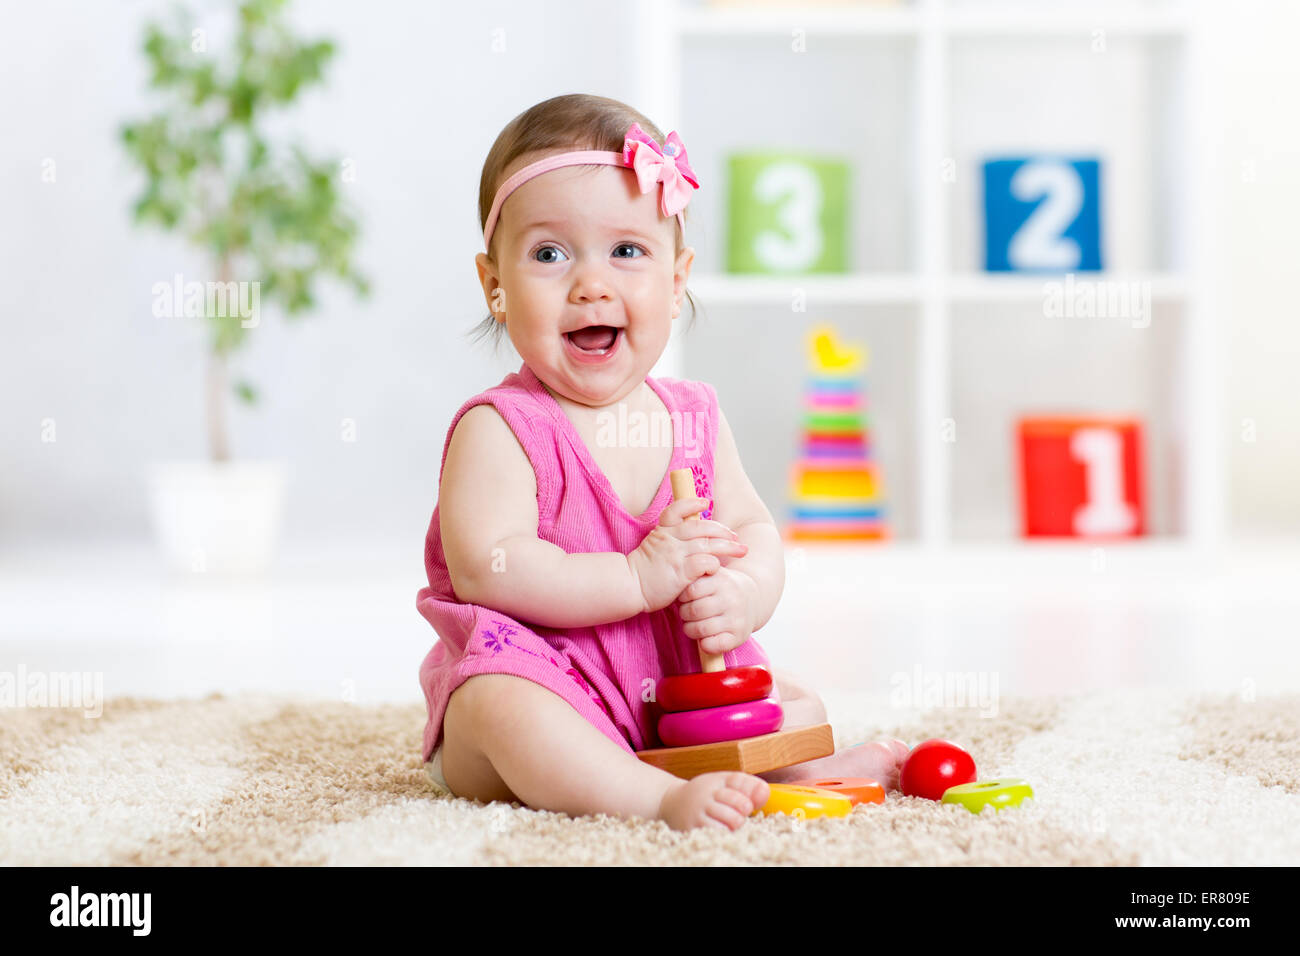 cute baby playing with colorful toy pyramid at home Stock Photo